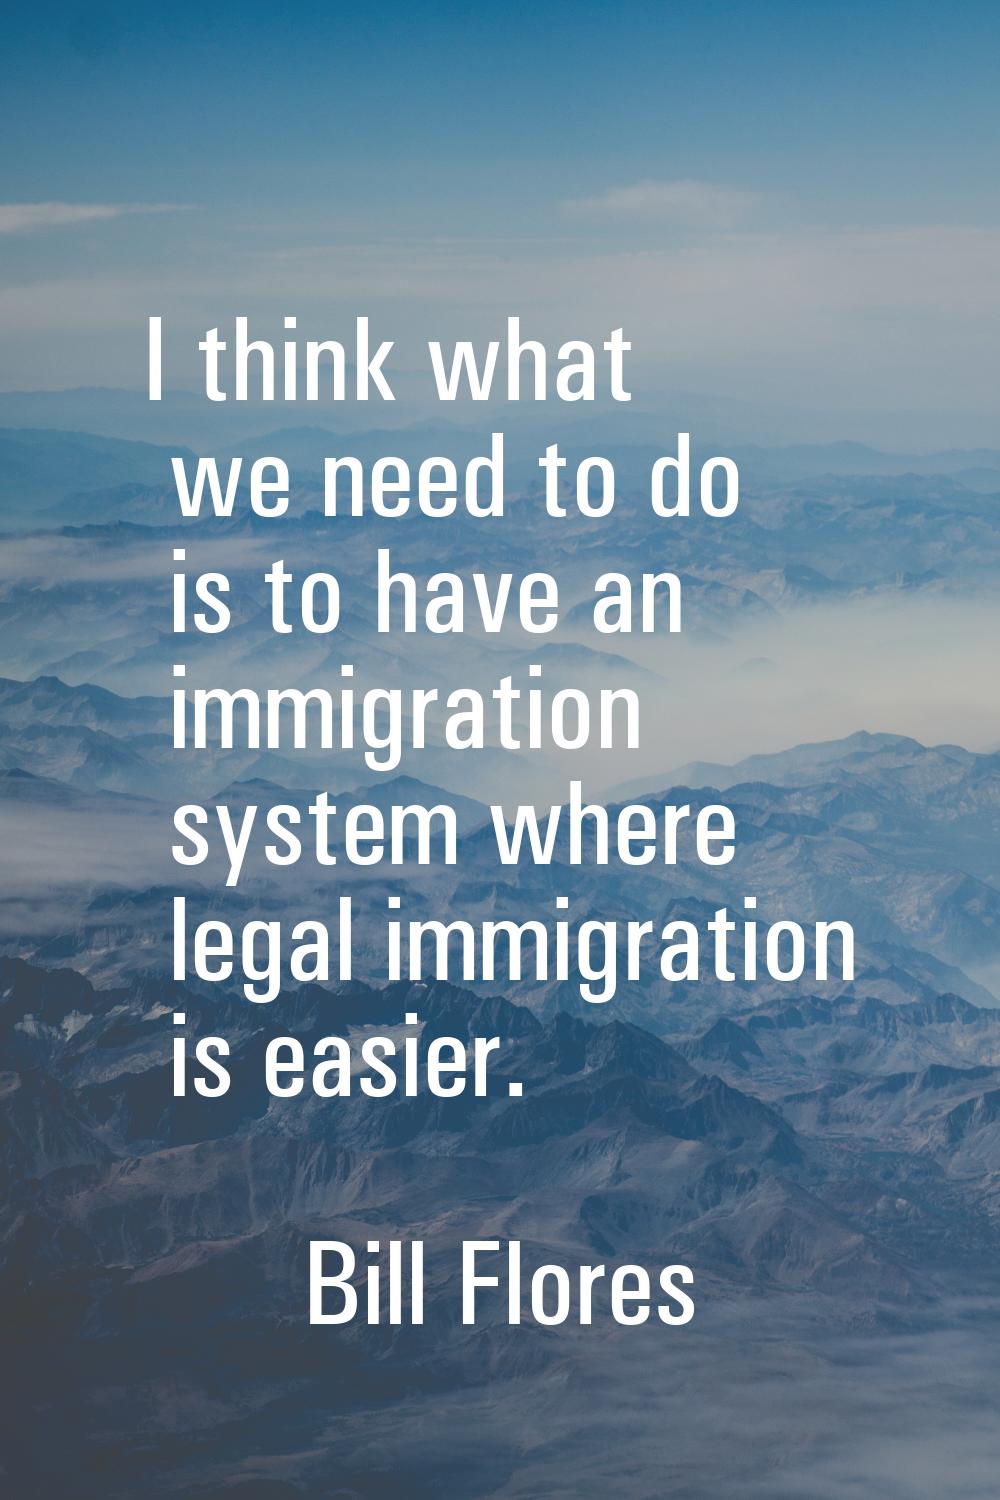 I think what we need to do is to have an immigration system where legal immigration is easier.